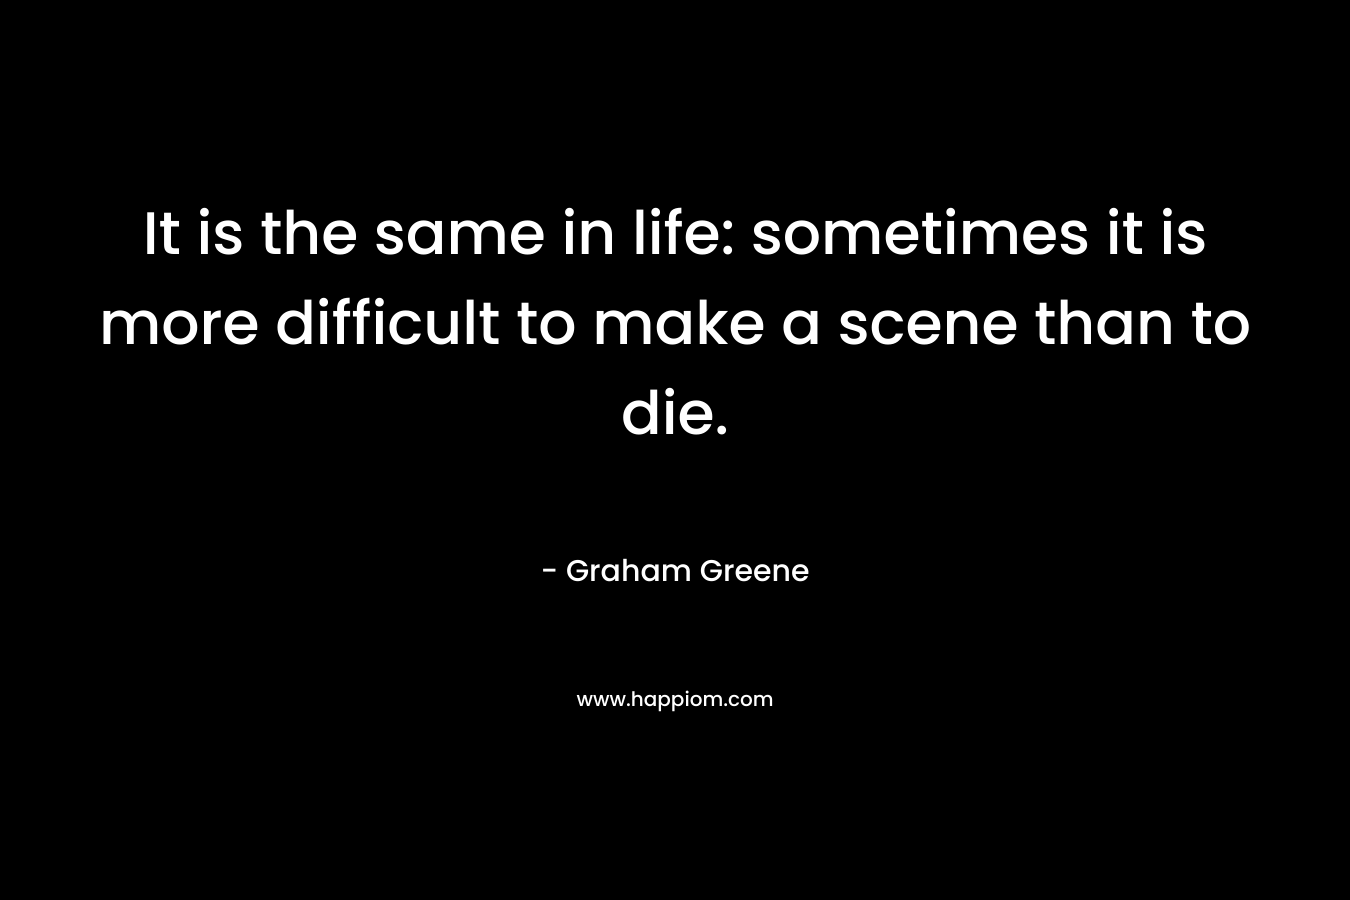 It is the same in life: sometimes it is more difficult to make a scene than to die. – Graham Greene